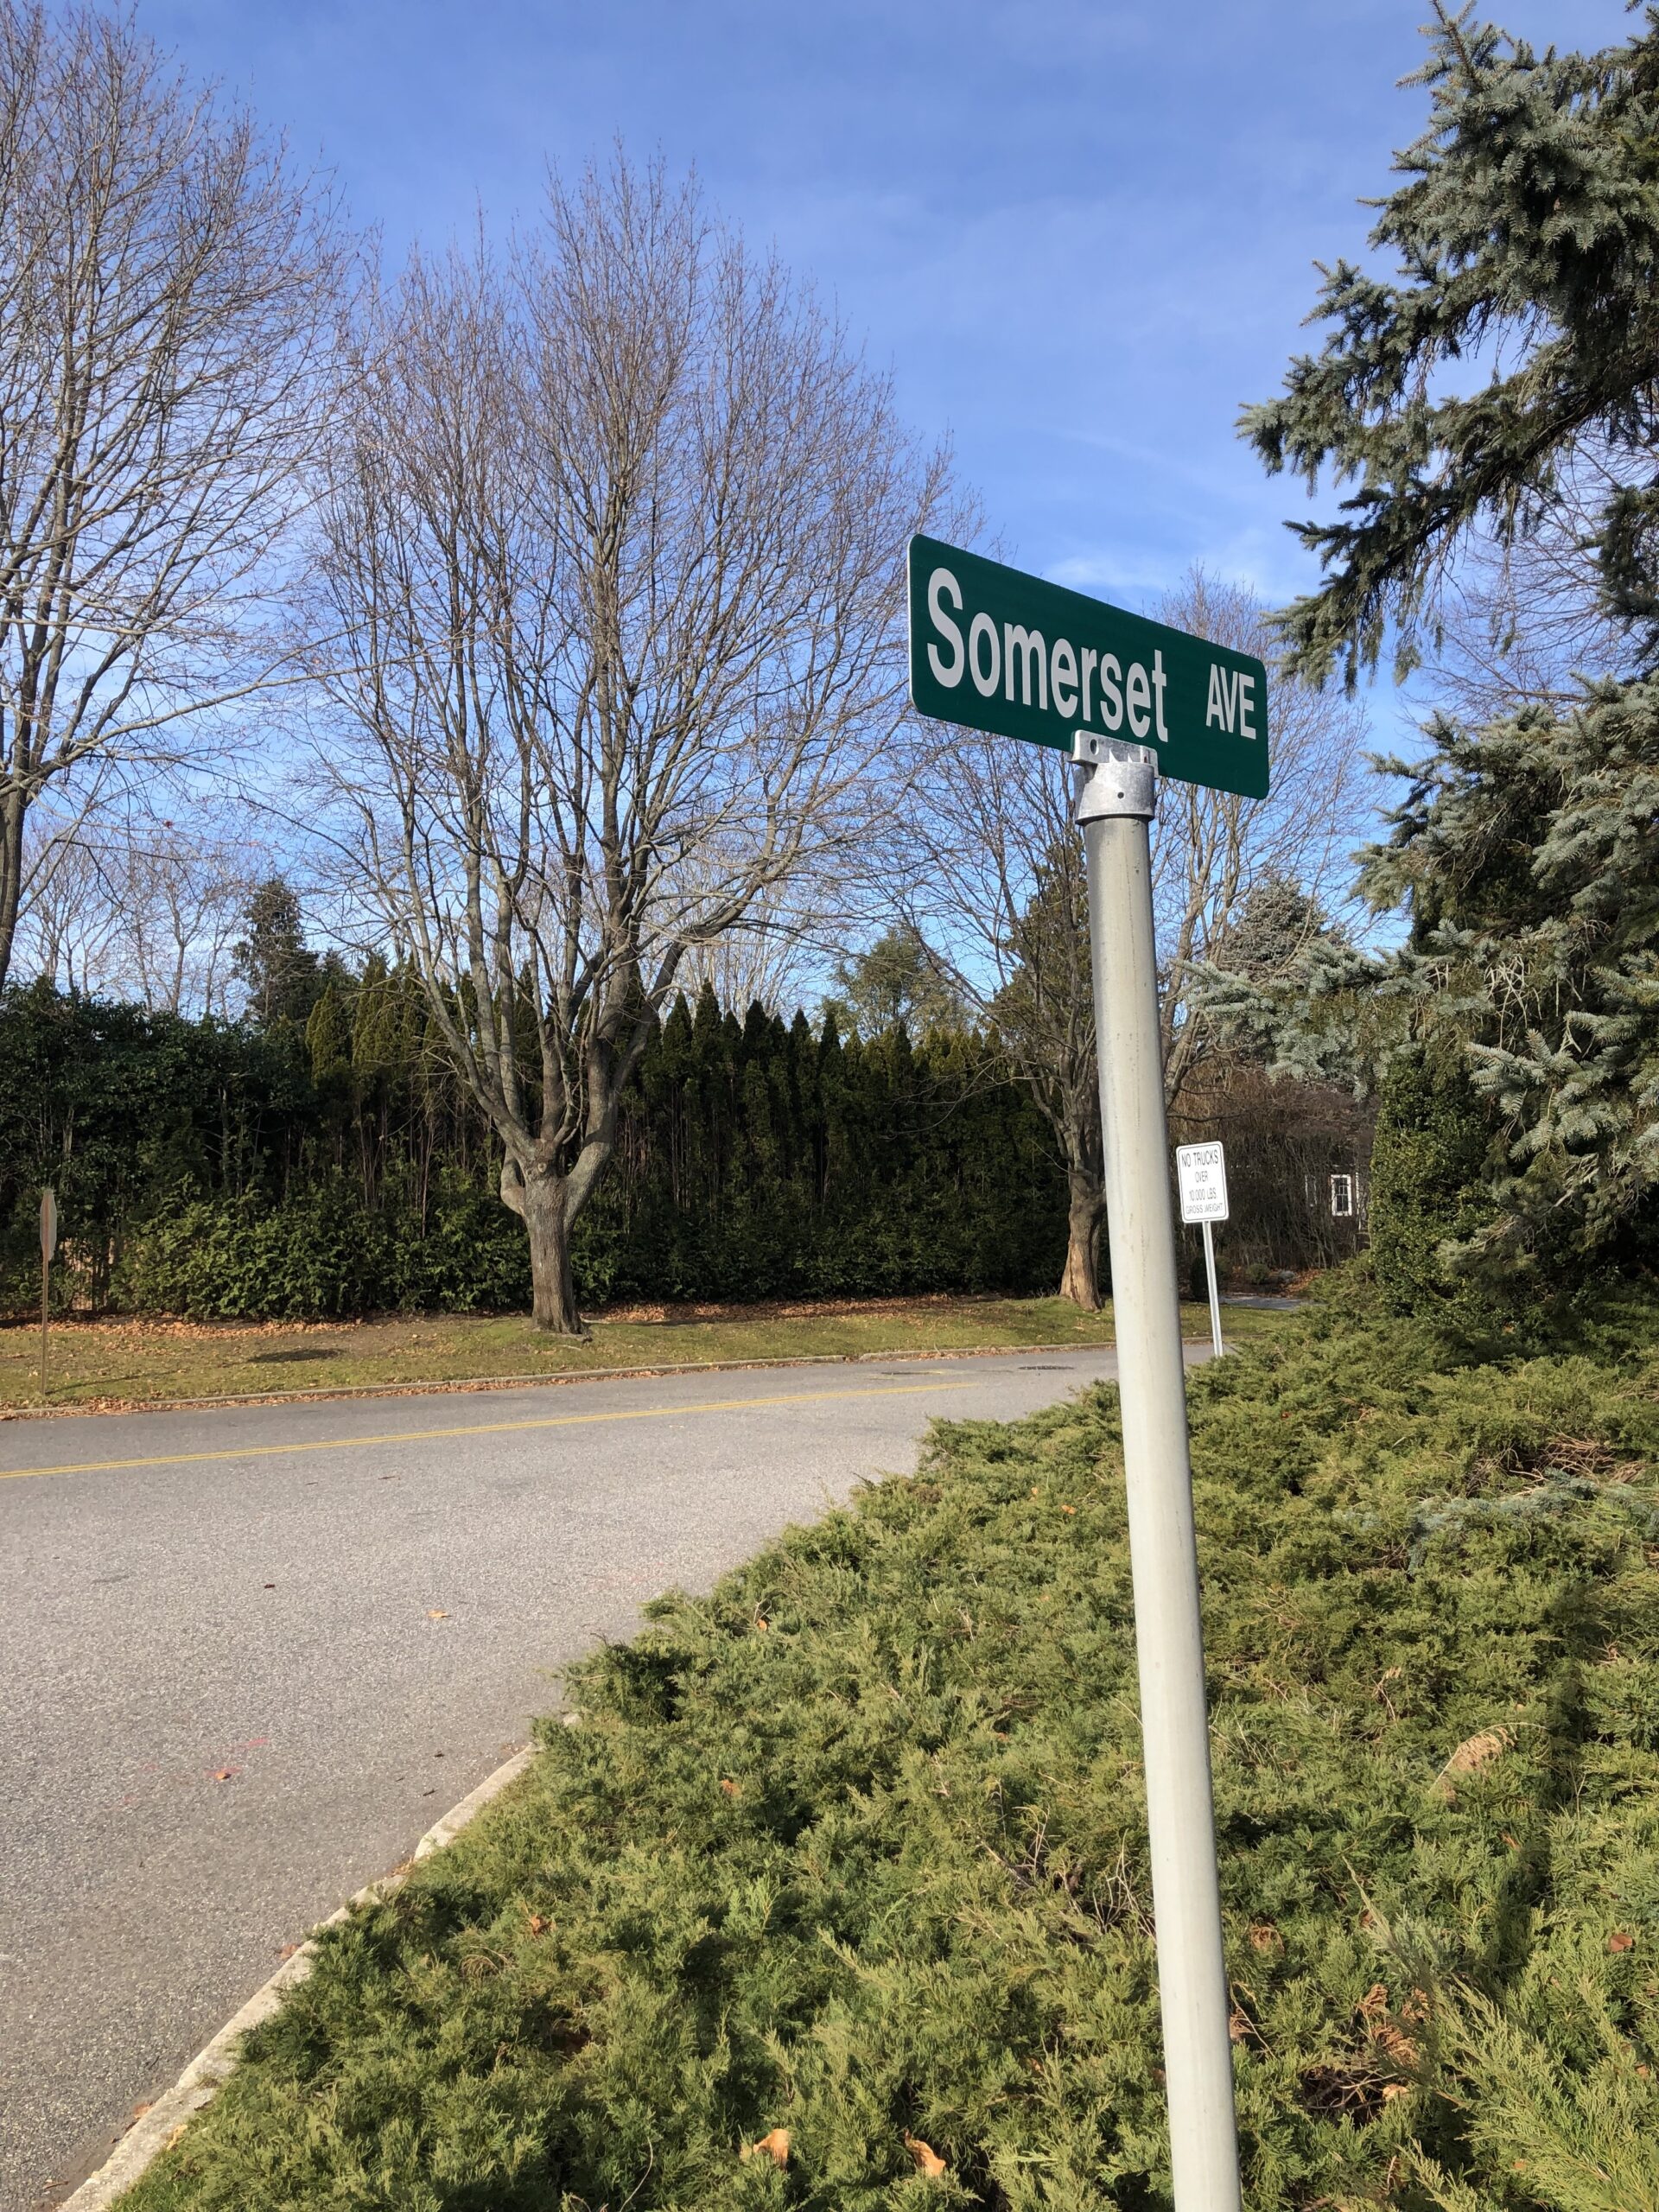 The police barricade on Somerset Avenue will be removed at 8 p.m. on Friday night, January 20, so the village can conduct a traffic study in the area. CAILIN RILEY